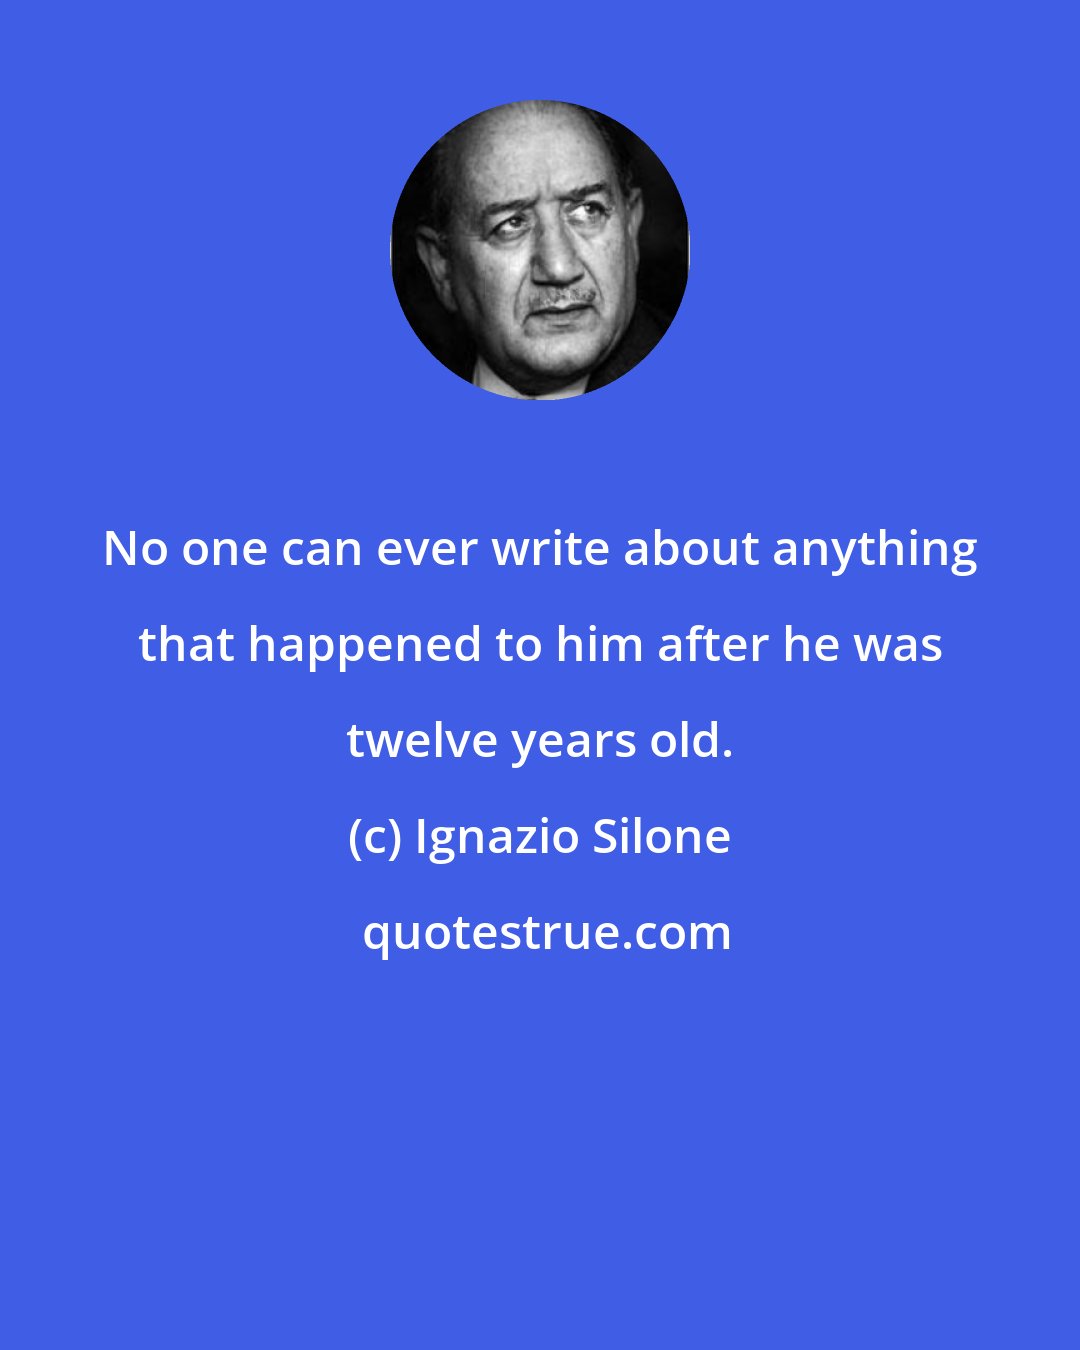 Ignazio Silone: No one can ever write about anything that happened to him after he was twelve years old.